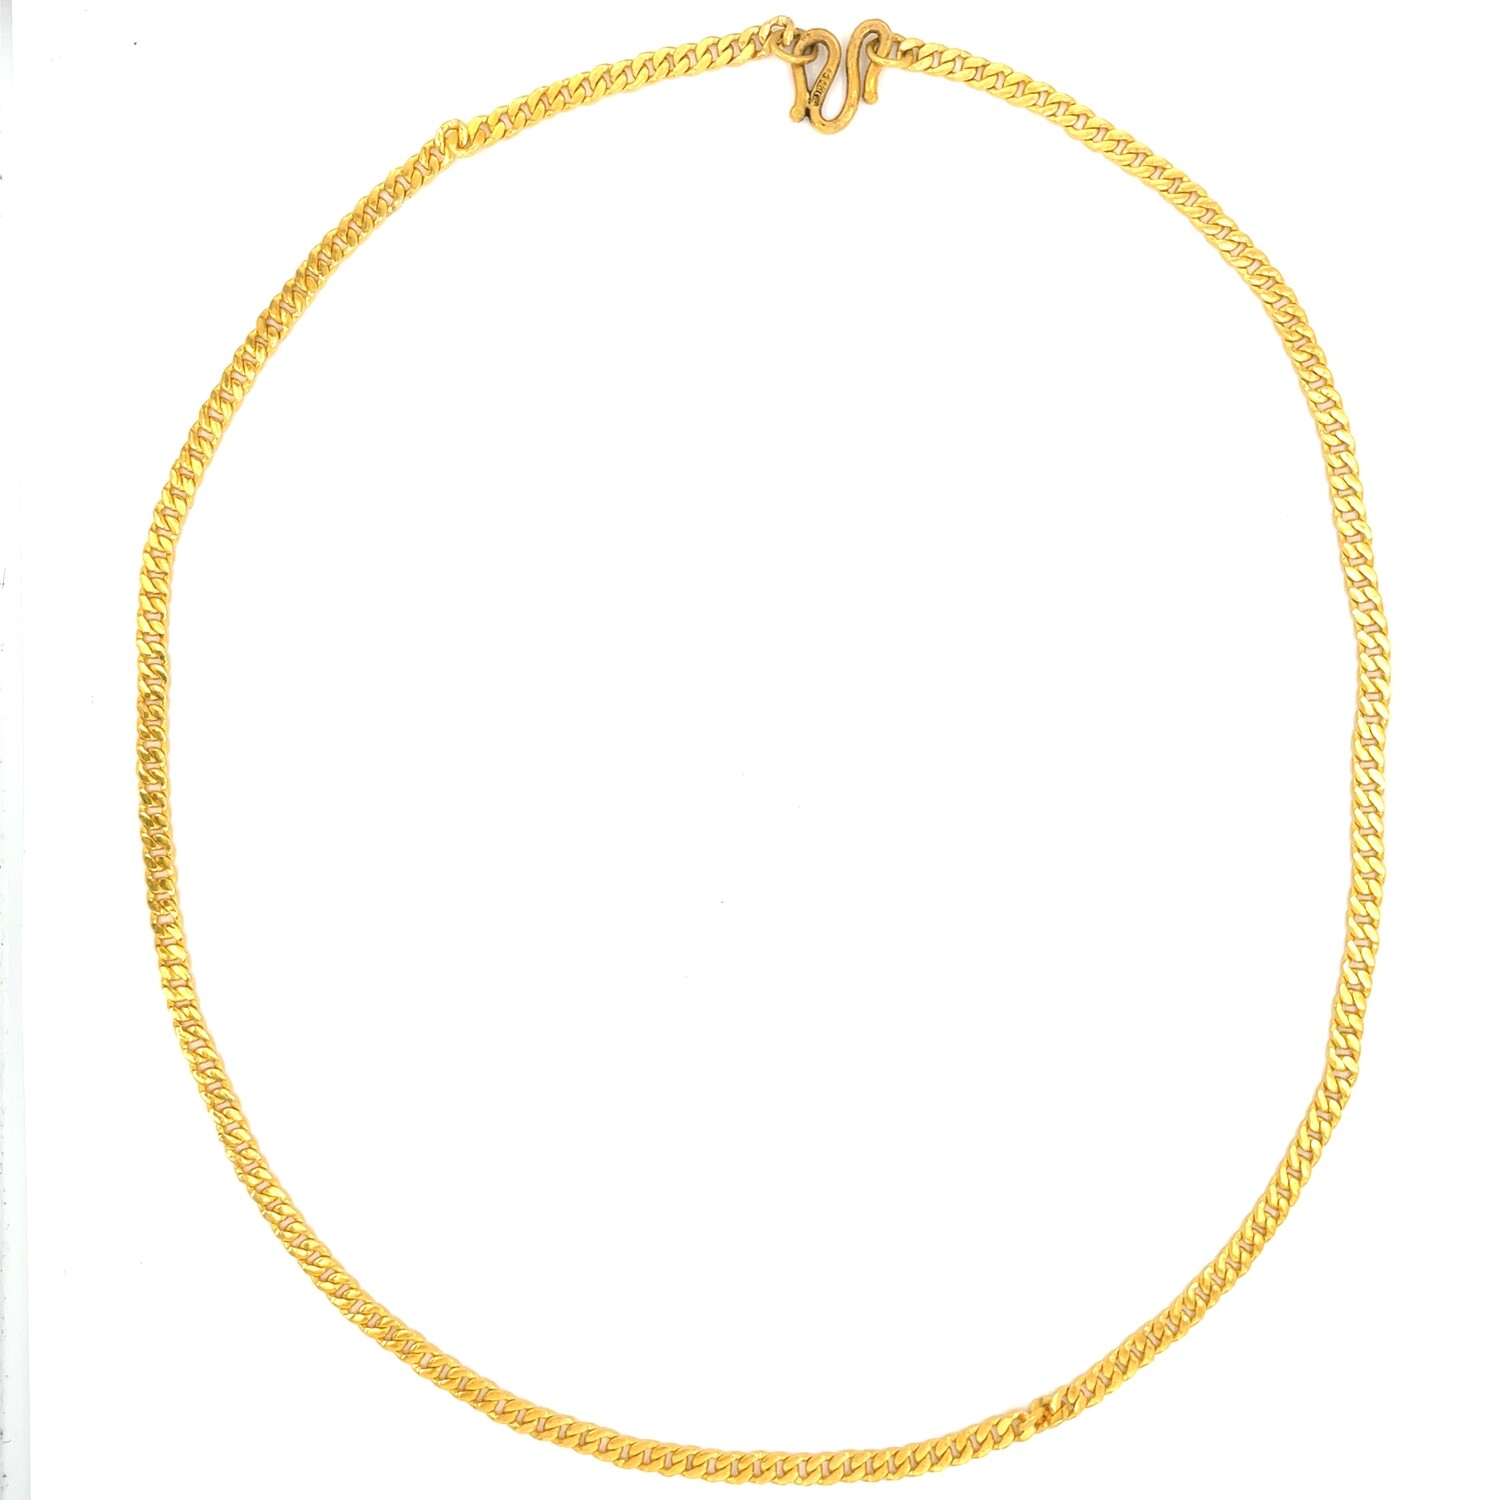 Estate Chain in 24k Yellow Gold — 18”